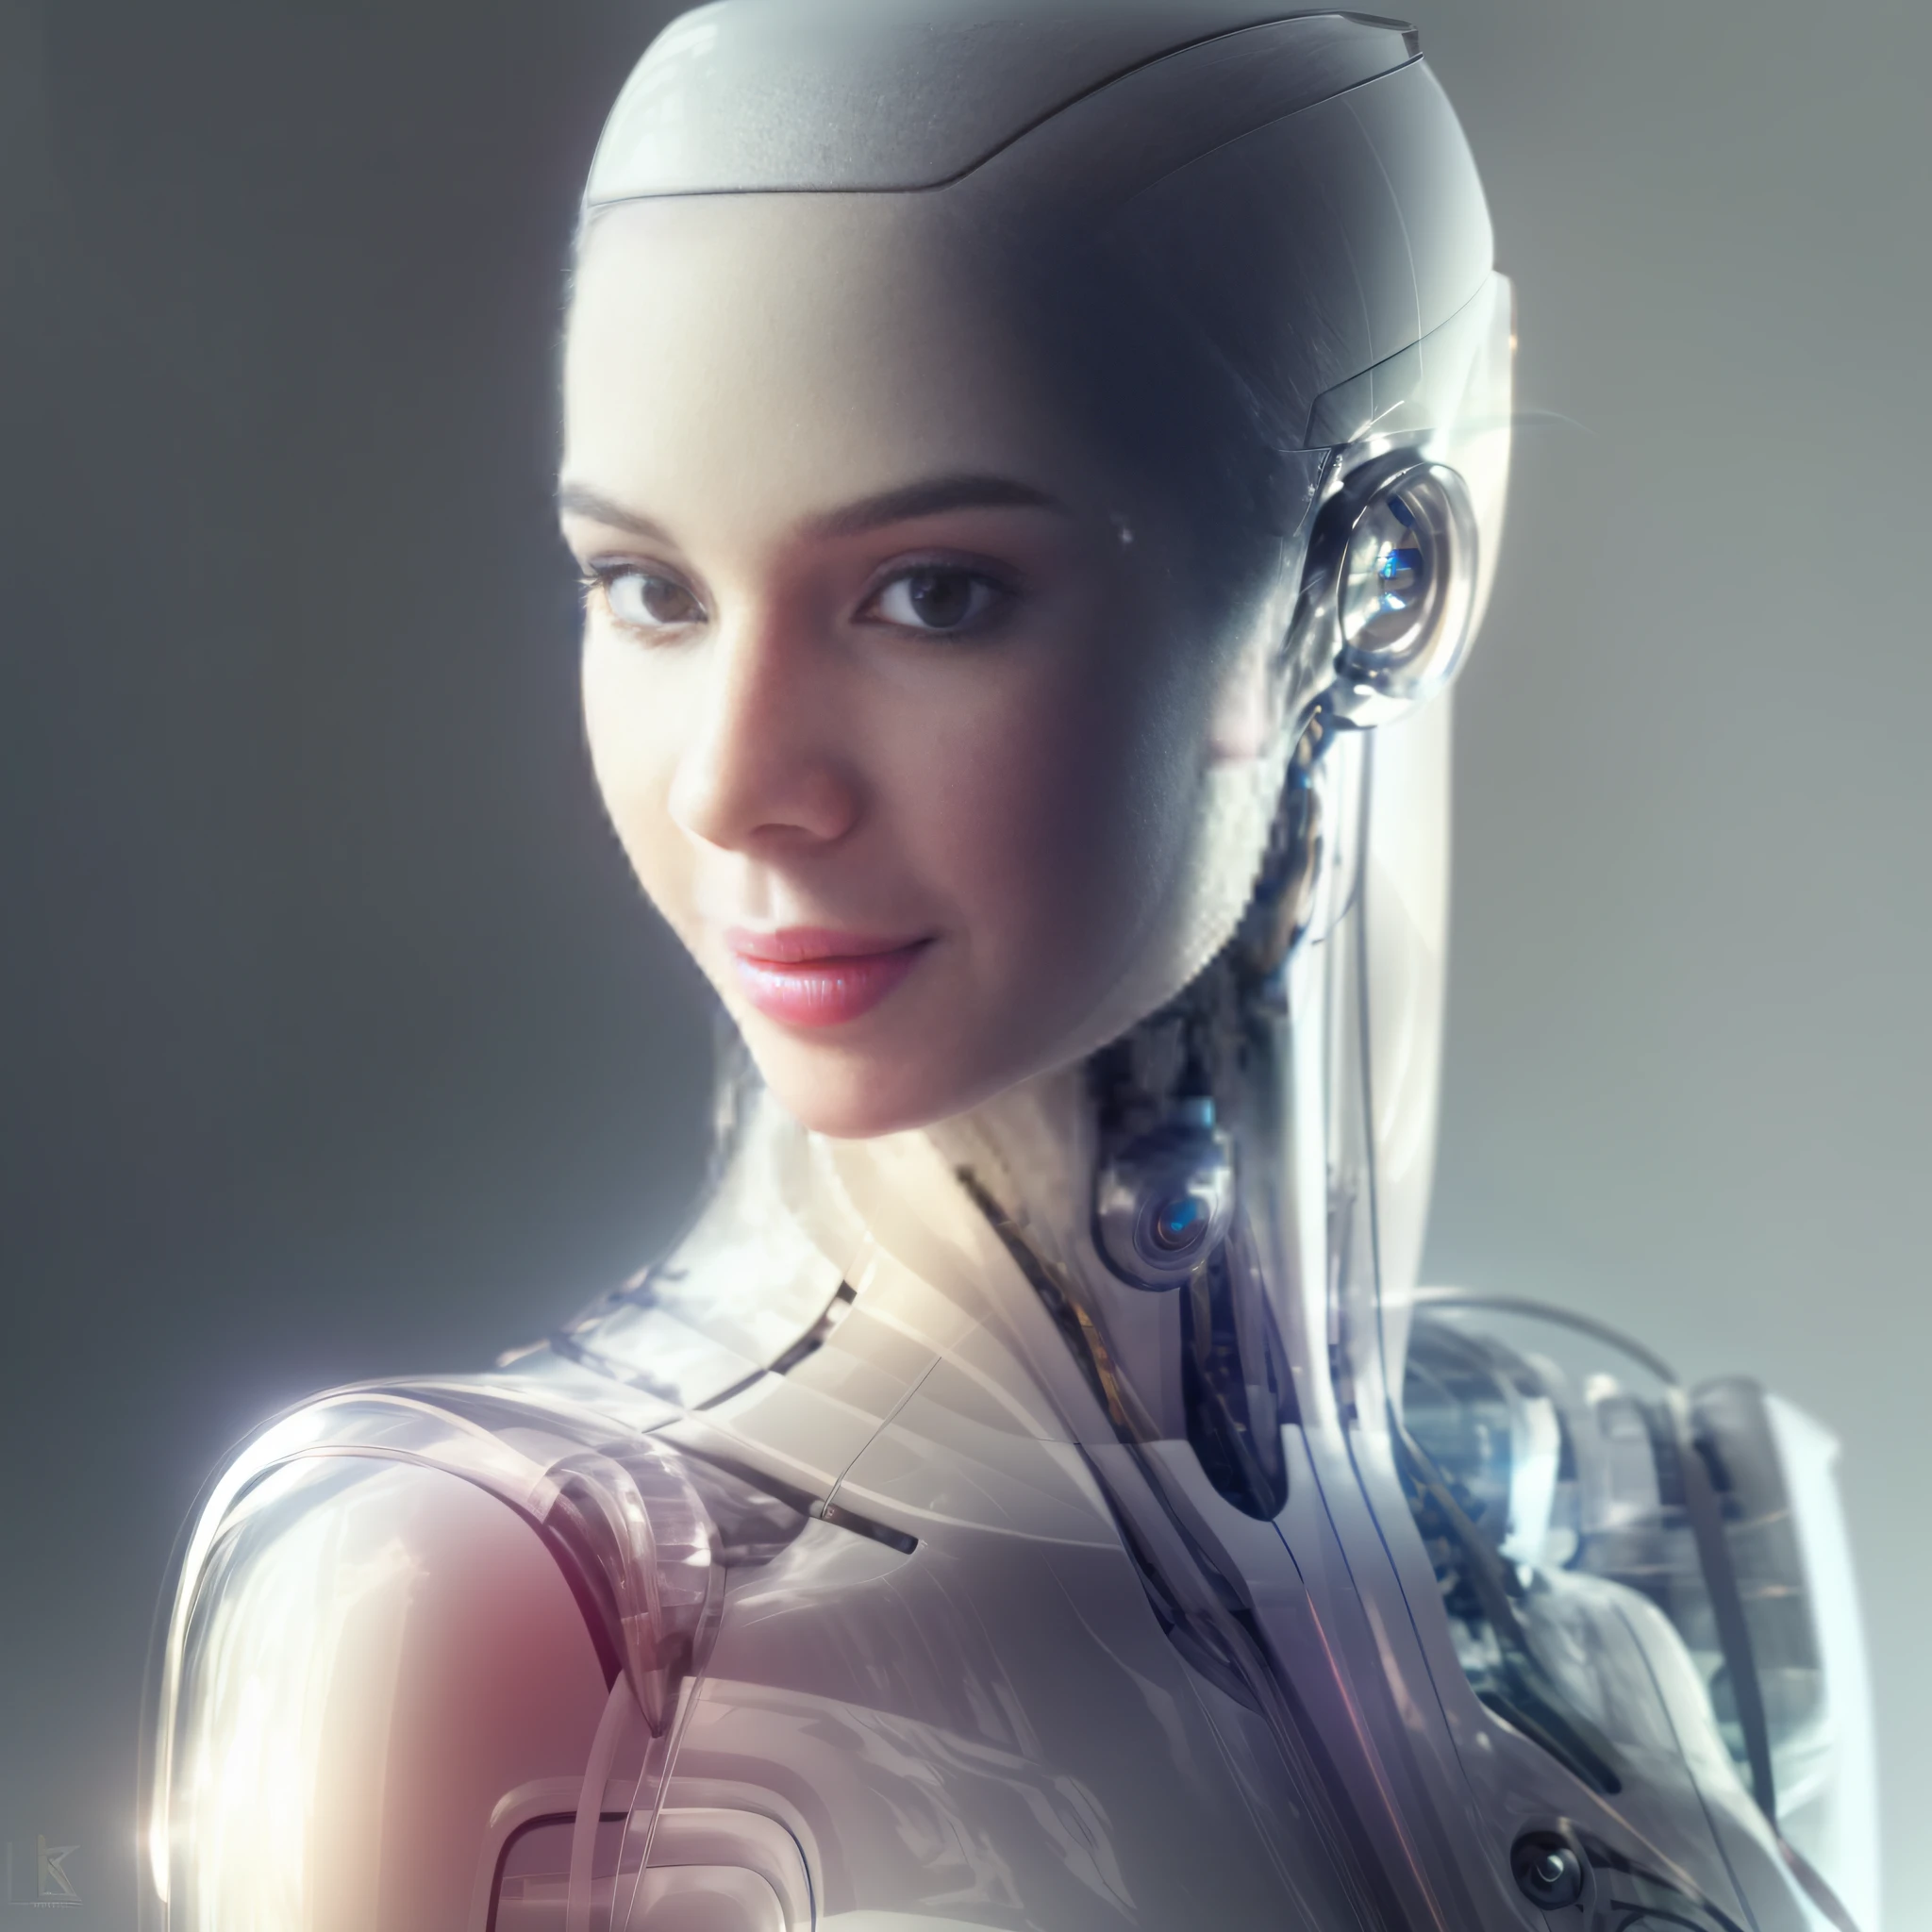 There is a closeup of a robot with a futuristic head with a transparent acrylic outfit, robot femnia sensual model, integrated synthetic android, cyborg - girl, portrait of a female android, beautiful android woman, perfect android girl, cyborg girl, female android, humanoid woman, female robot, cute female android, cyborg woman, intricate trans-human, ultra detailed female android,  Portrait of an android, beautiful white cyborg girl, fashion photography, ashion